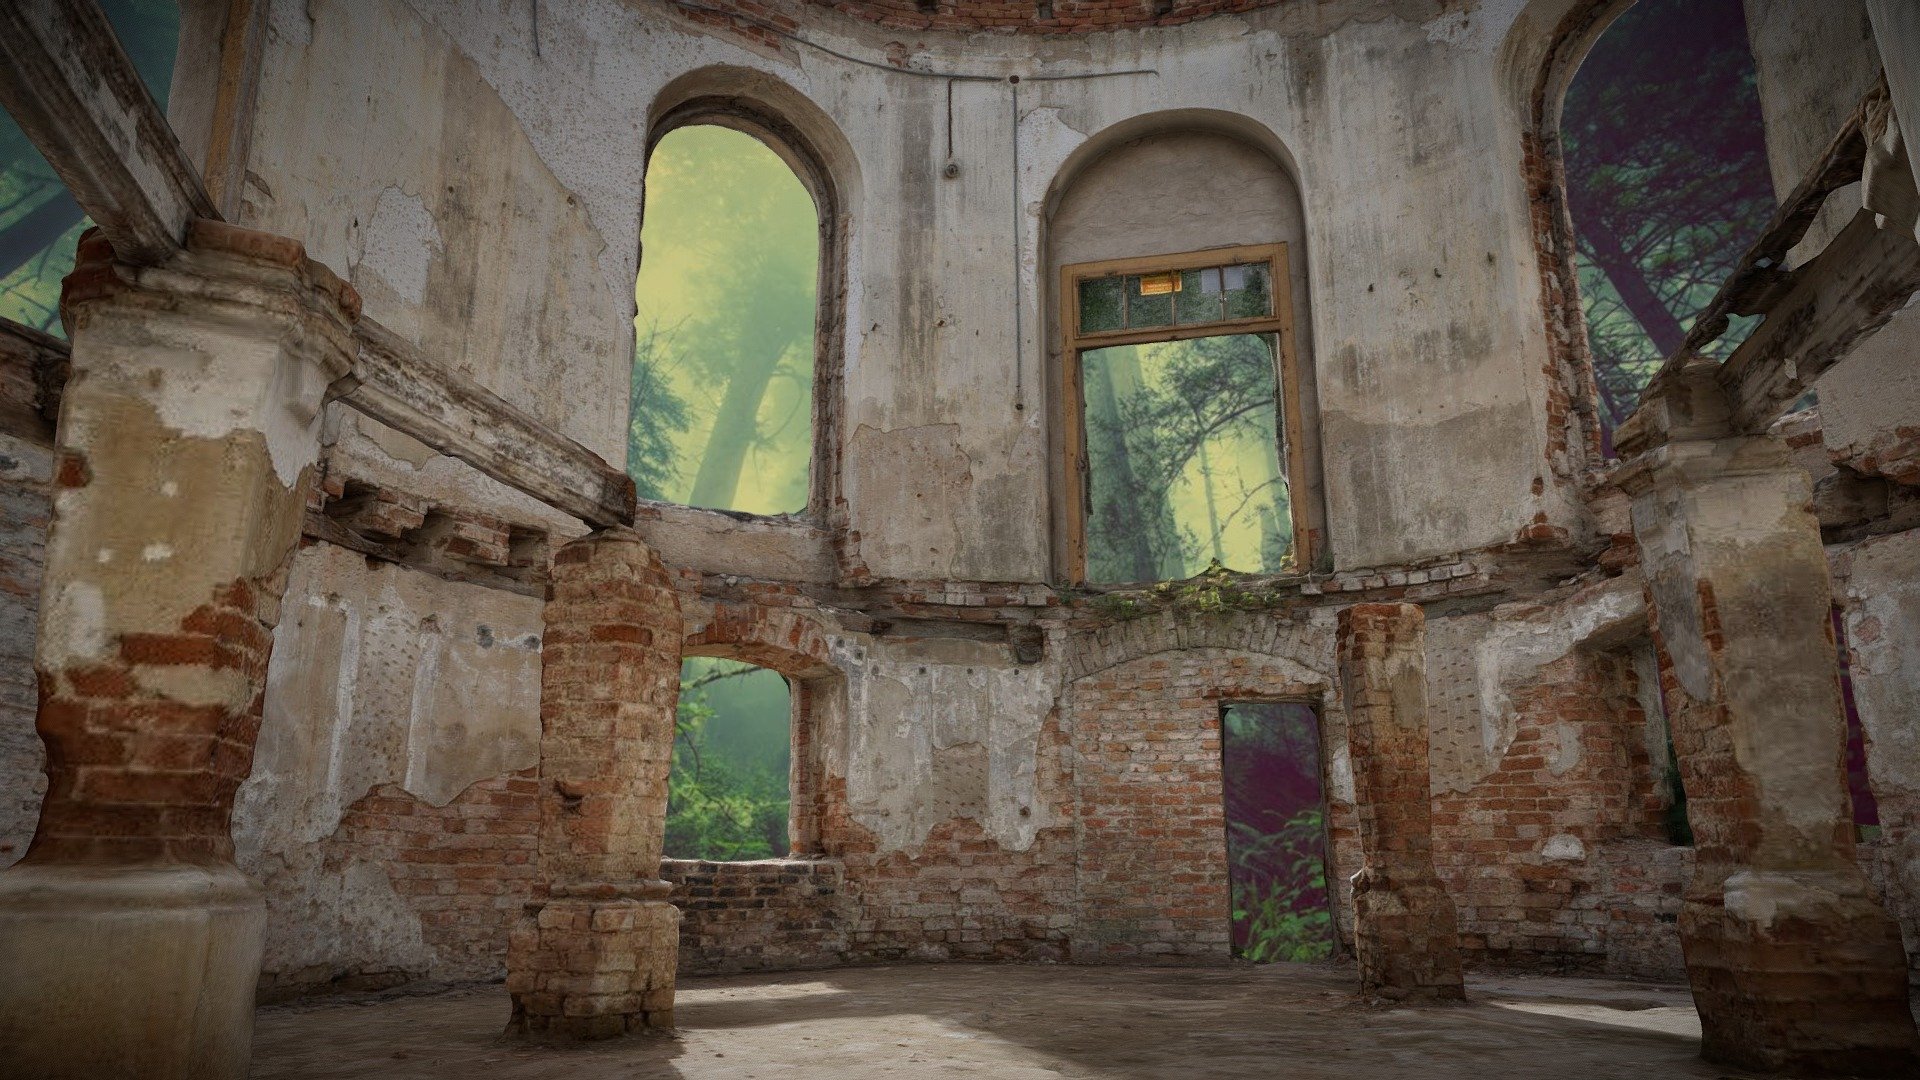 Old ruined oval room in baroque palace.

Created in RealityCapture by Capturing Reality from 215 images and laser scanning 3d.

If you like my work leave a like or comment and follow me for more! Thanks :) - Old ruined oval room in baroque palace - Buy Royalty Free 3D model by archiwum_xyz 3d model